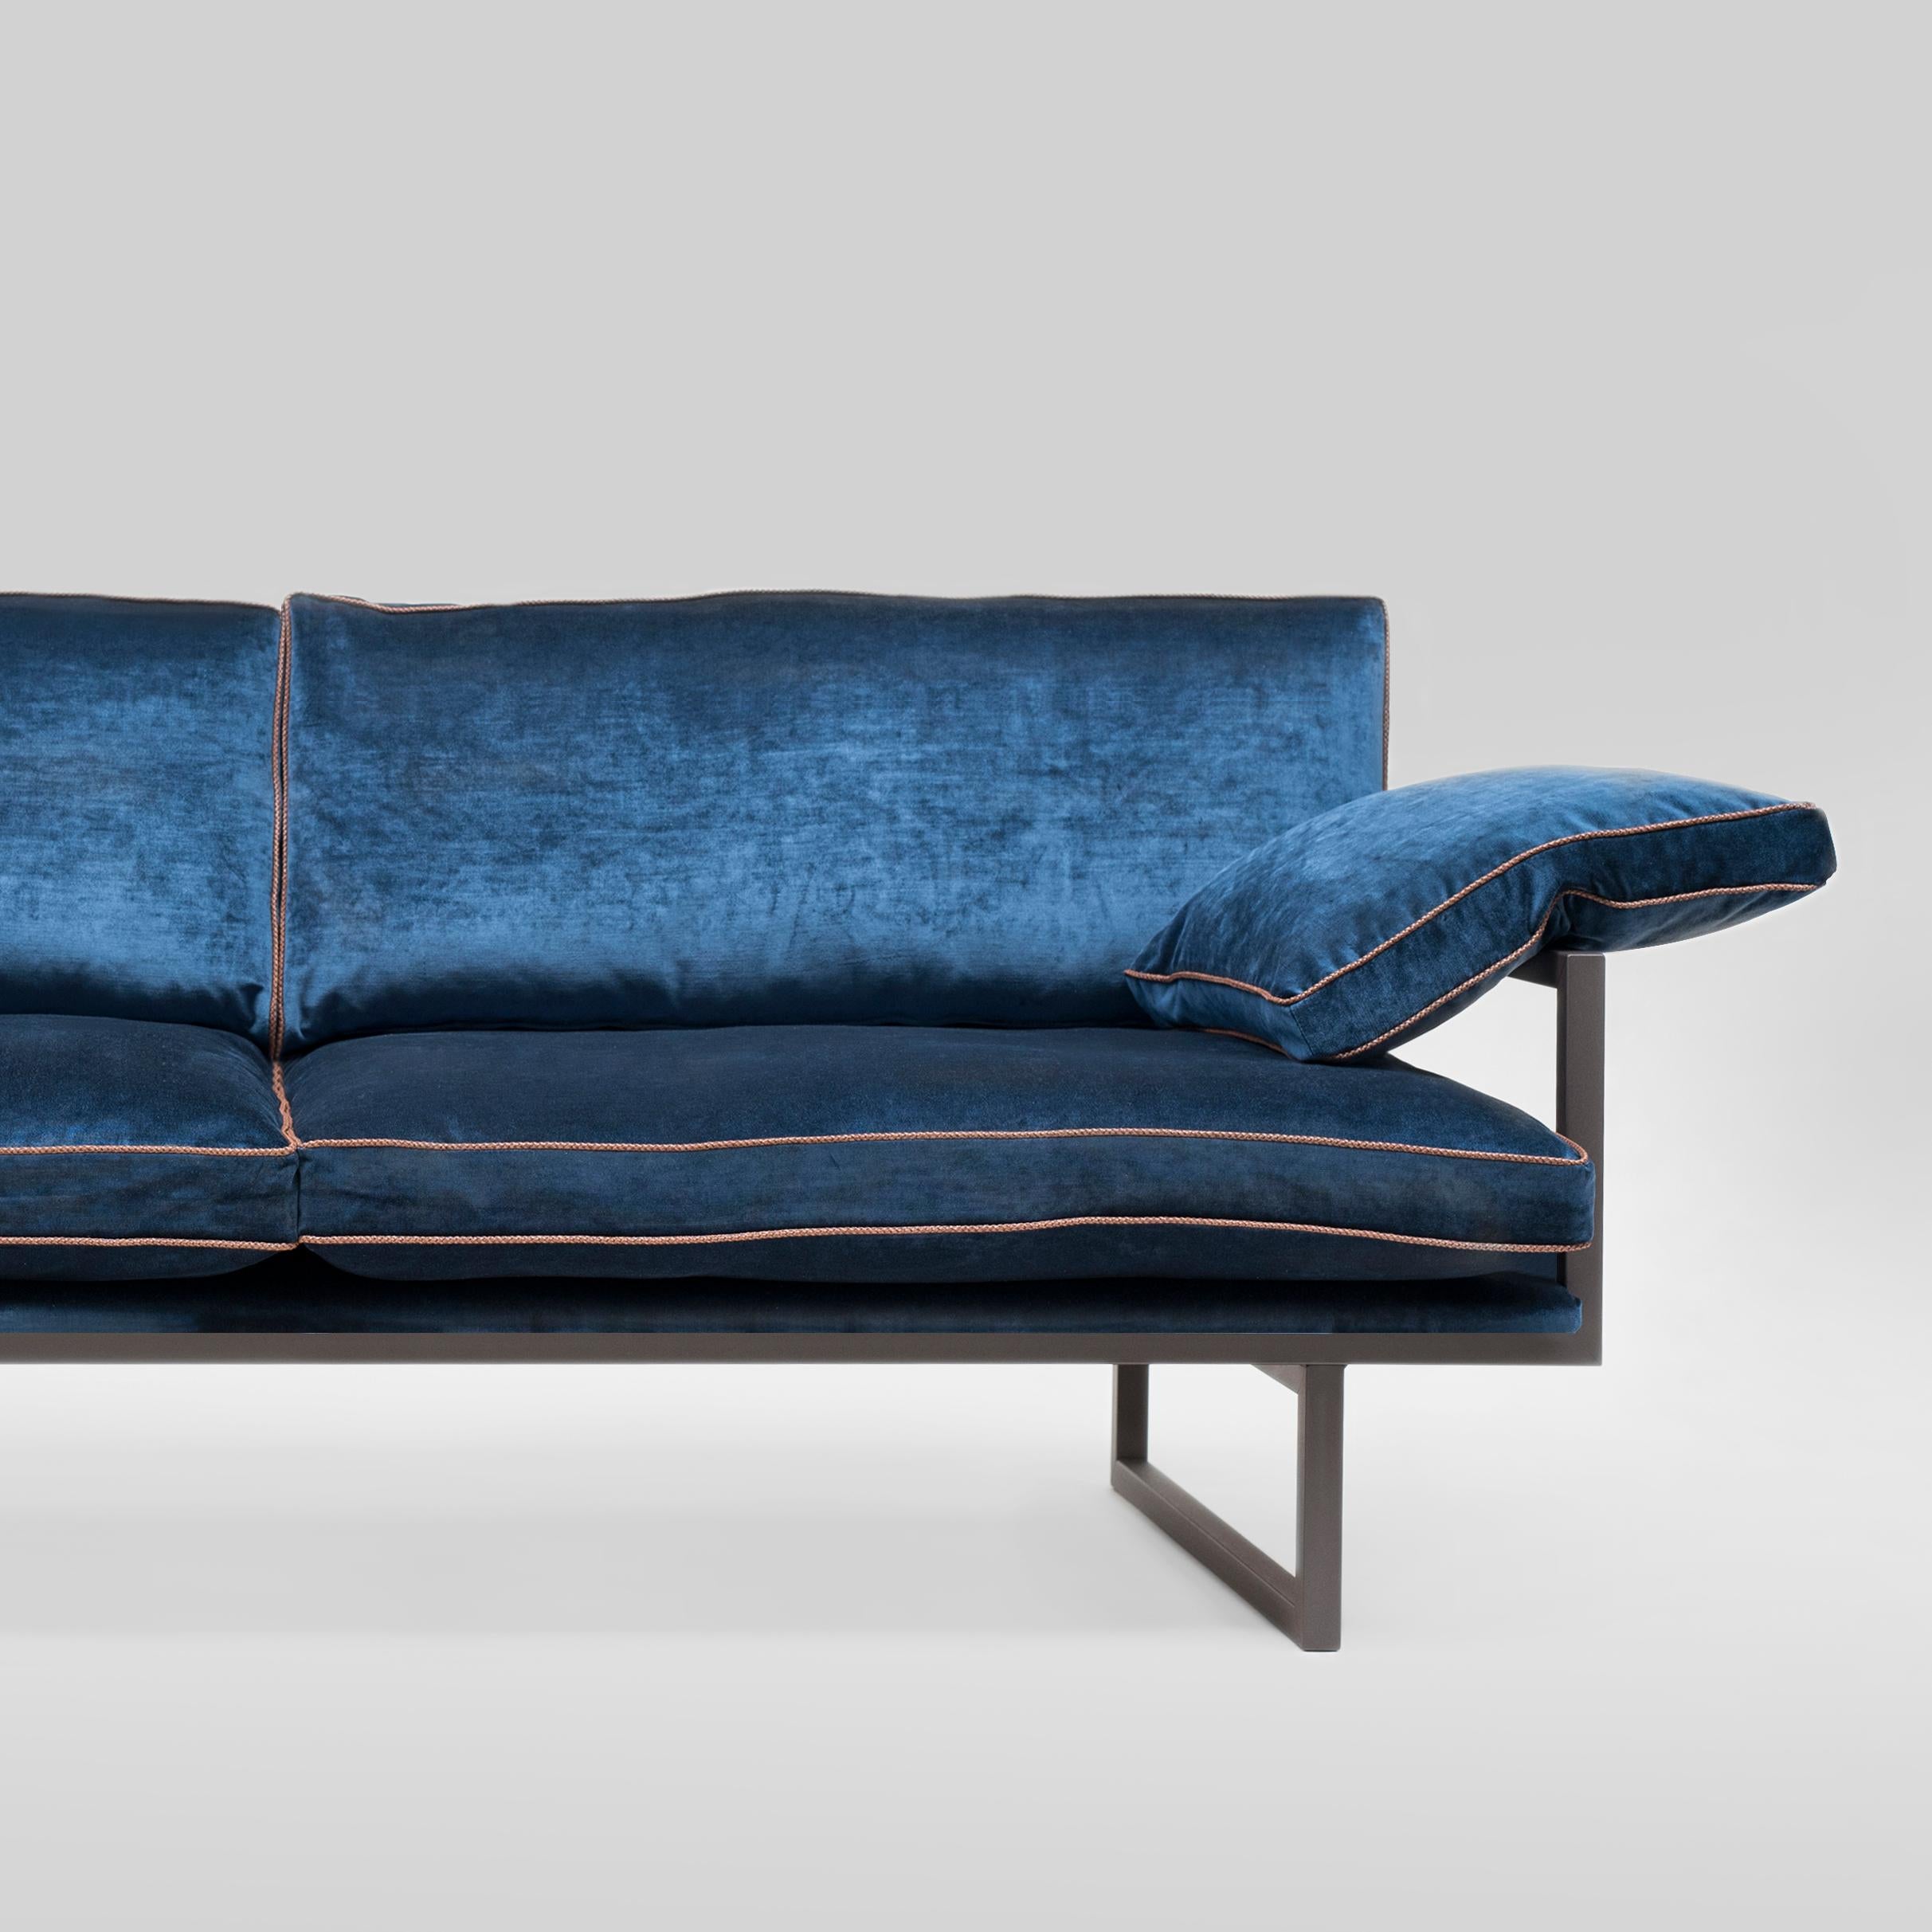 Sofa designed by Peter Ghyczy.
Manufactured by Ghyczy (Netherlands)

This sofa has an airy and light weight architectural construction. The GP01 is designed with an adjustable backrest, which allows to adjust the seat depth.

Frame